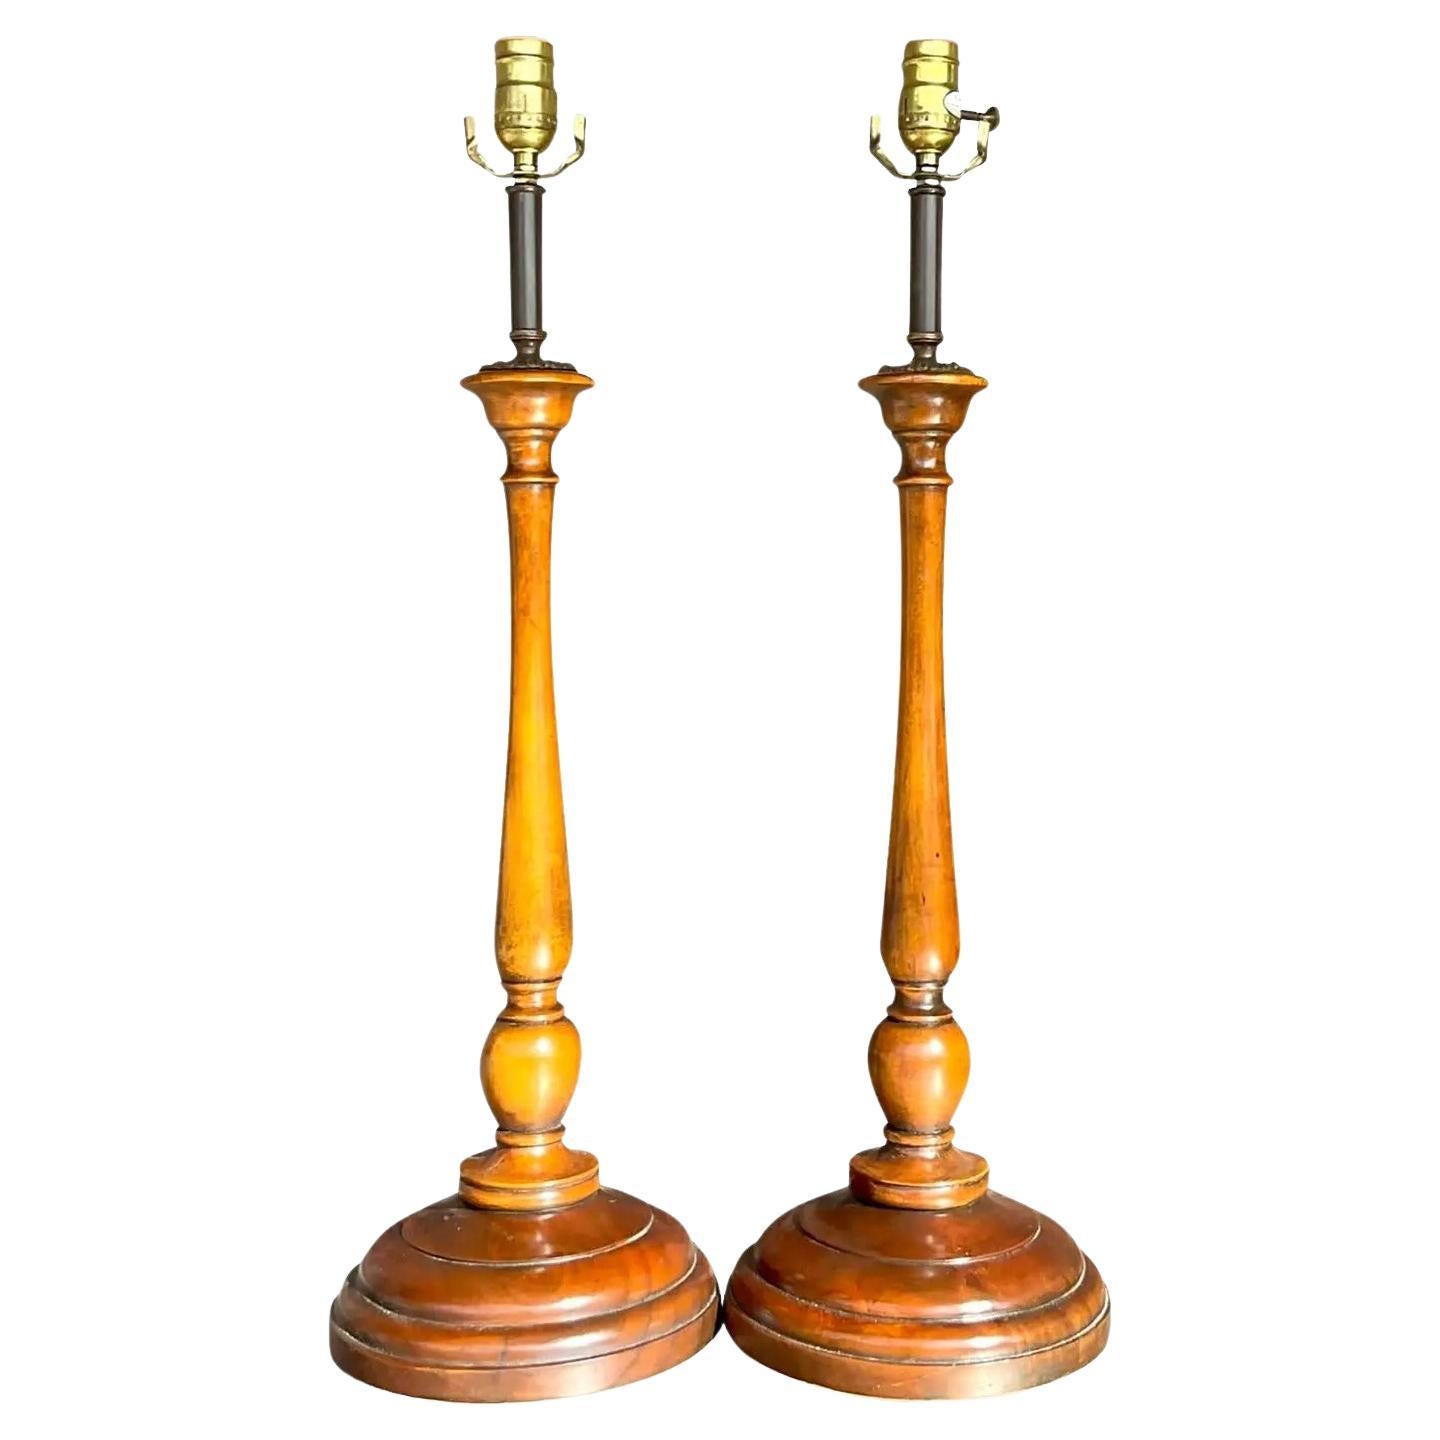 Vintage Regency Theodore Alexander Candlestick Lamps - a Pair